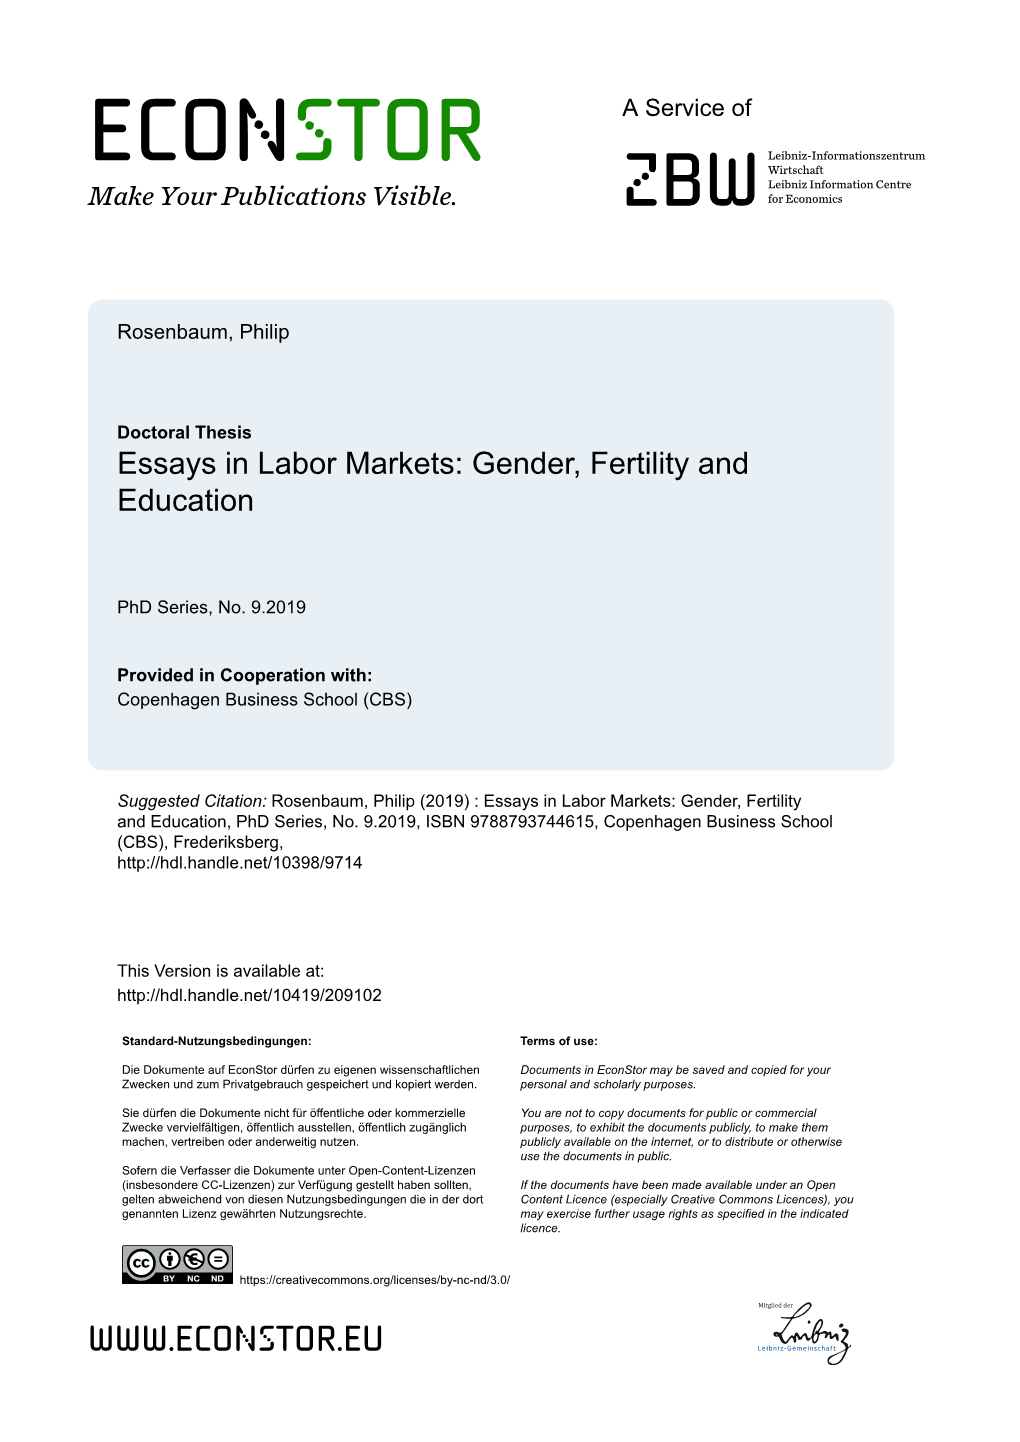 Essays in Labor Markets: Gender, Fertility and Education